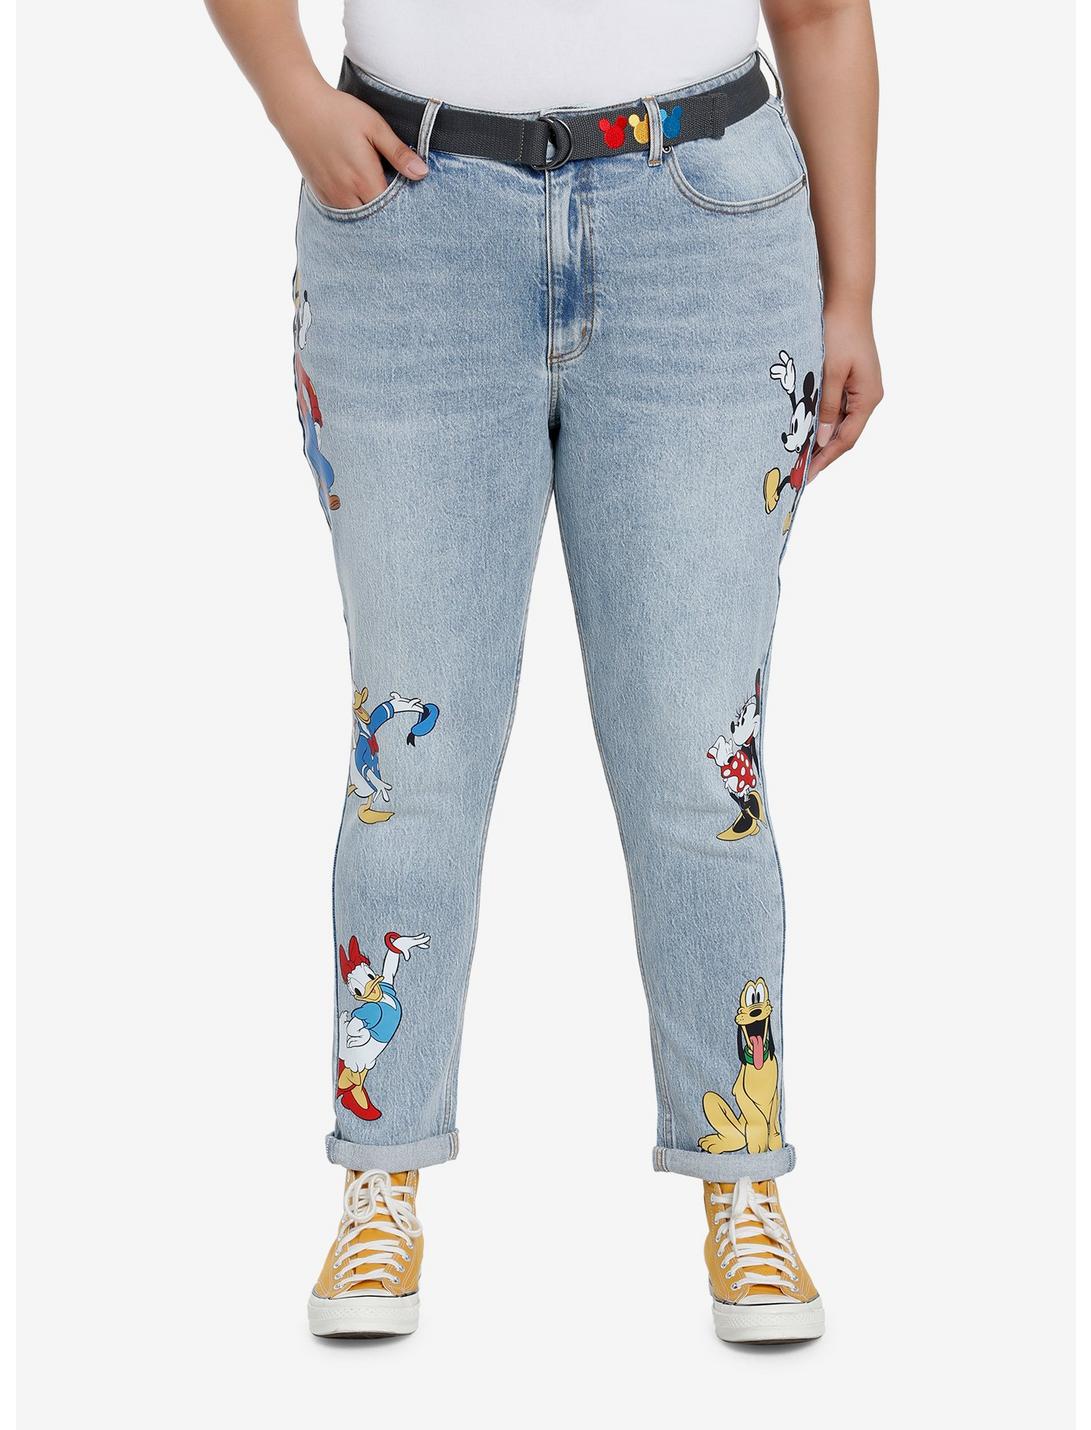 Disney Mickey Mouse And Friends Mom Jeans With Belt Plus Size, MEDIUM BLUE WASH, hi-res